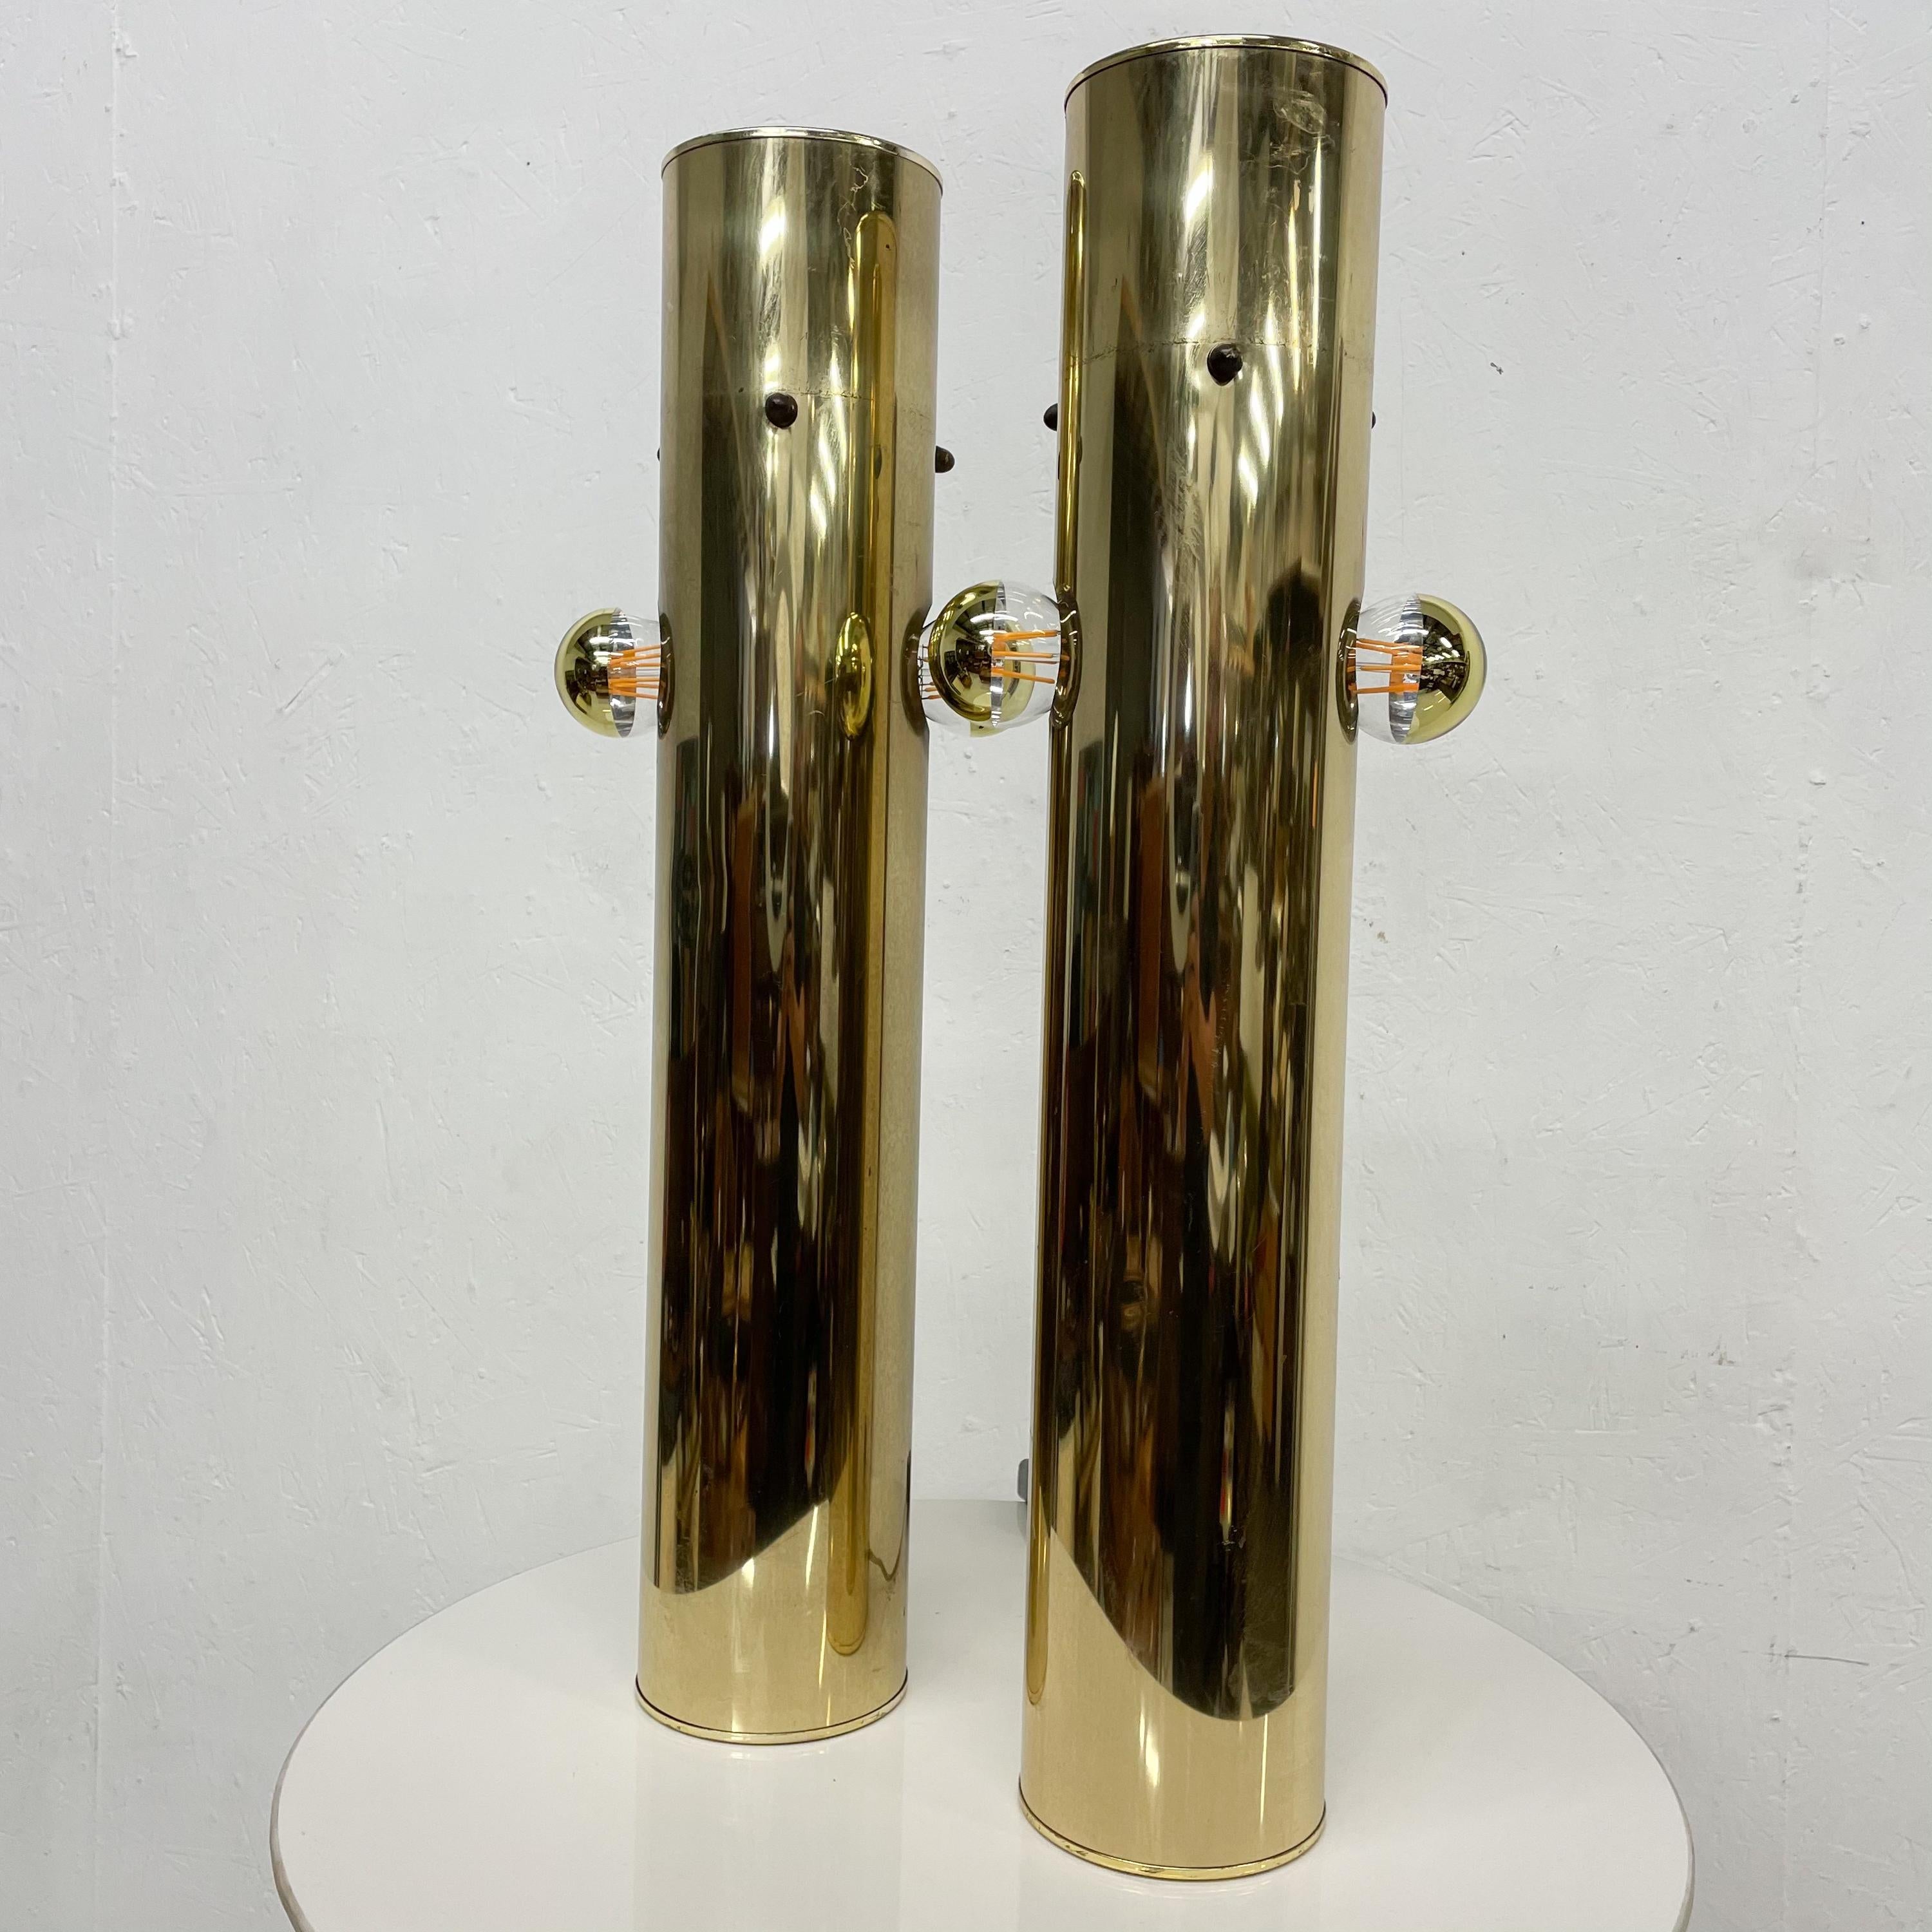 1970s Modern Brass Cylinder Table Lamp Pair Pop Art Sculptural Style of Robert Sonneman.
No verification present.
Features new cable wiring with dimmer. Includes Two Bulbs.
Original Preowned Vintage Unrestored condition. 
Scuffs and Patina on